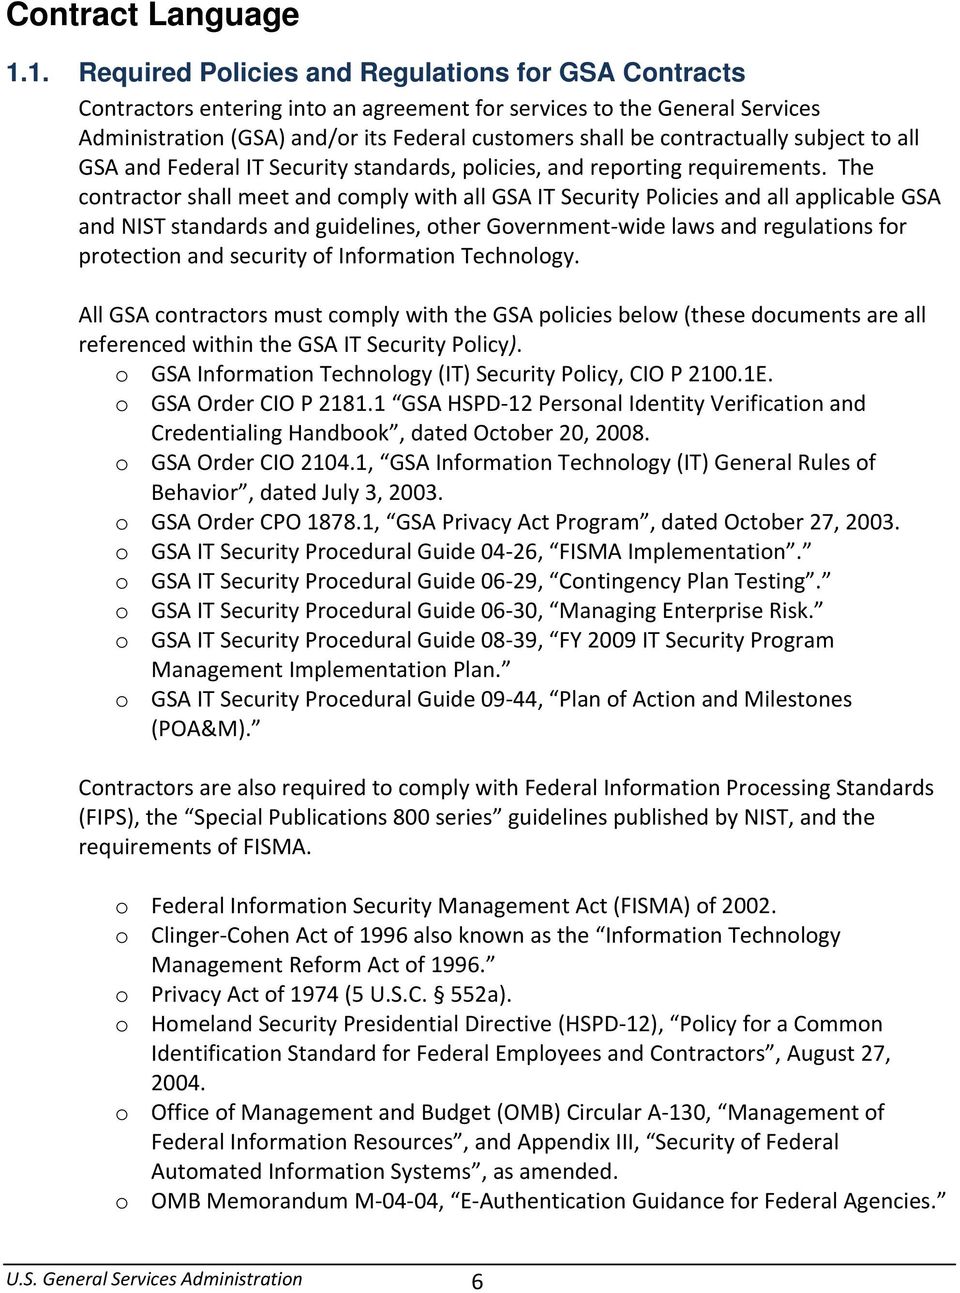 contractually subject to all GSA and Federal IT Security standards, policies, and reporting requirements.